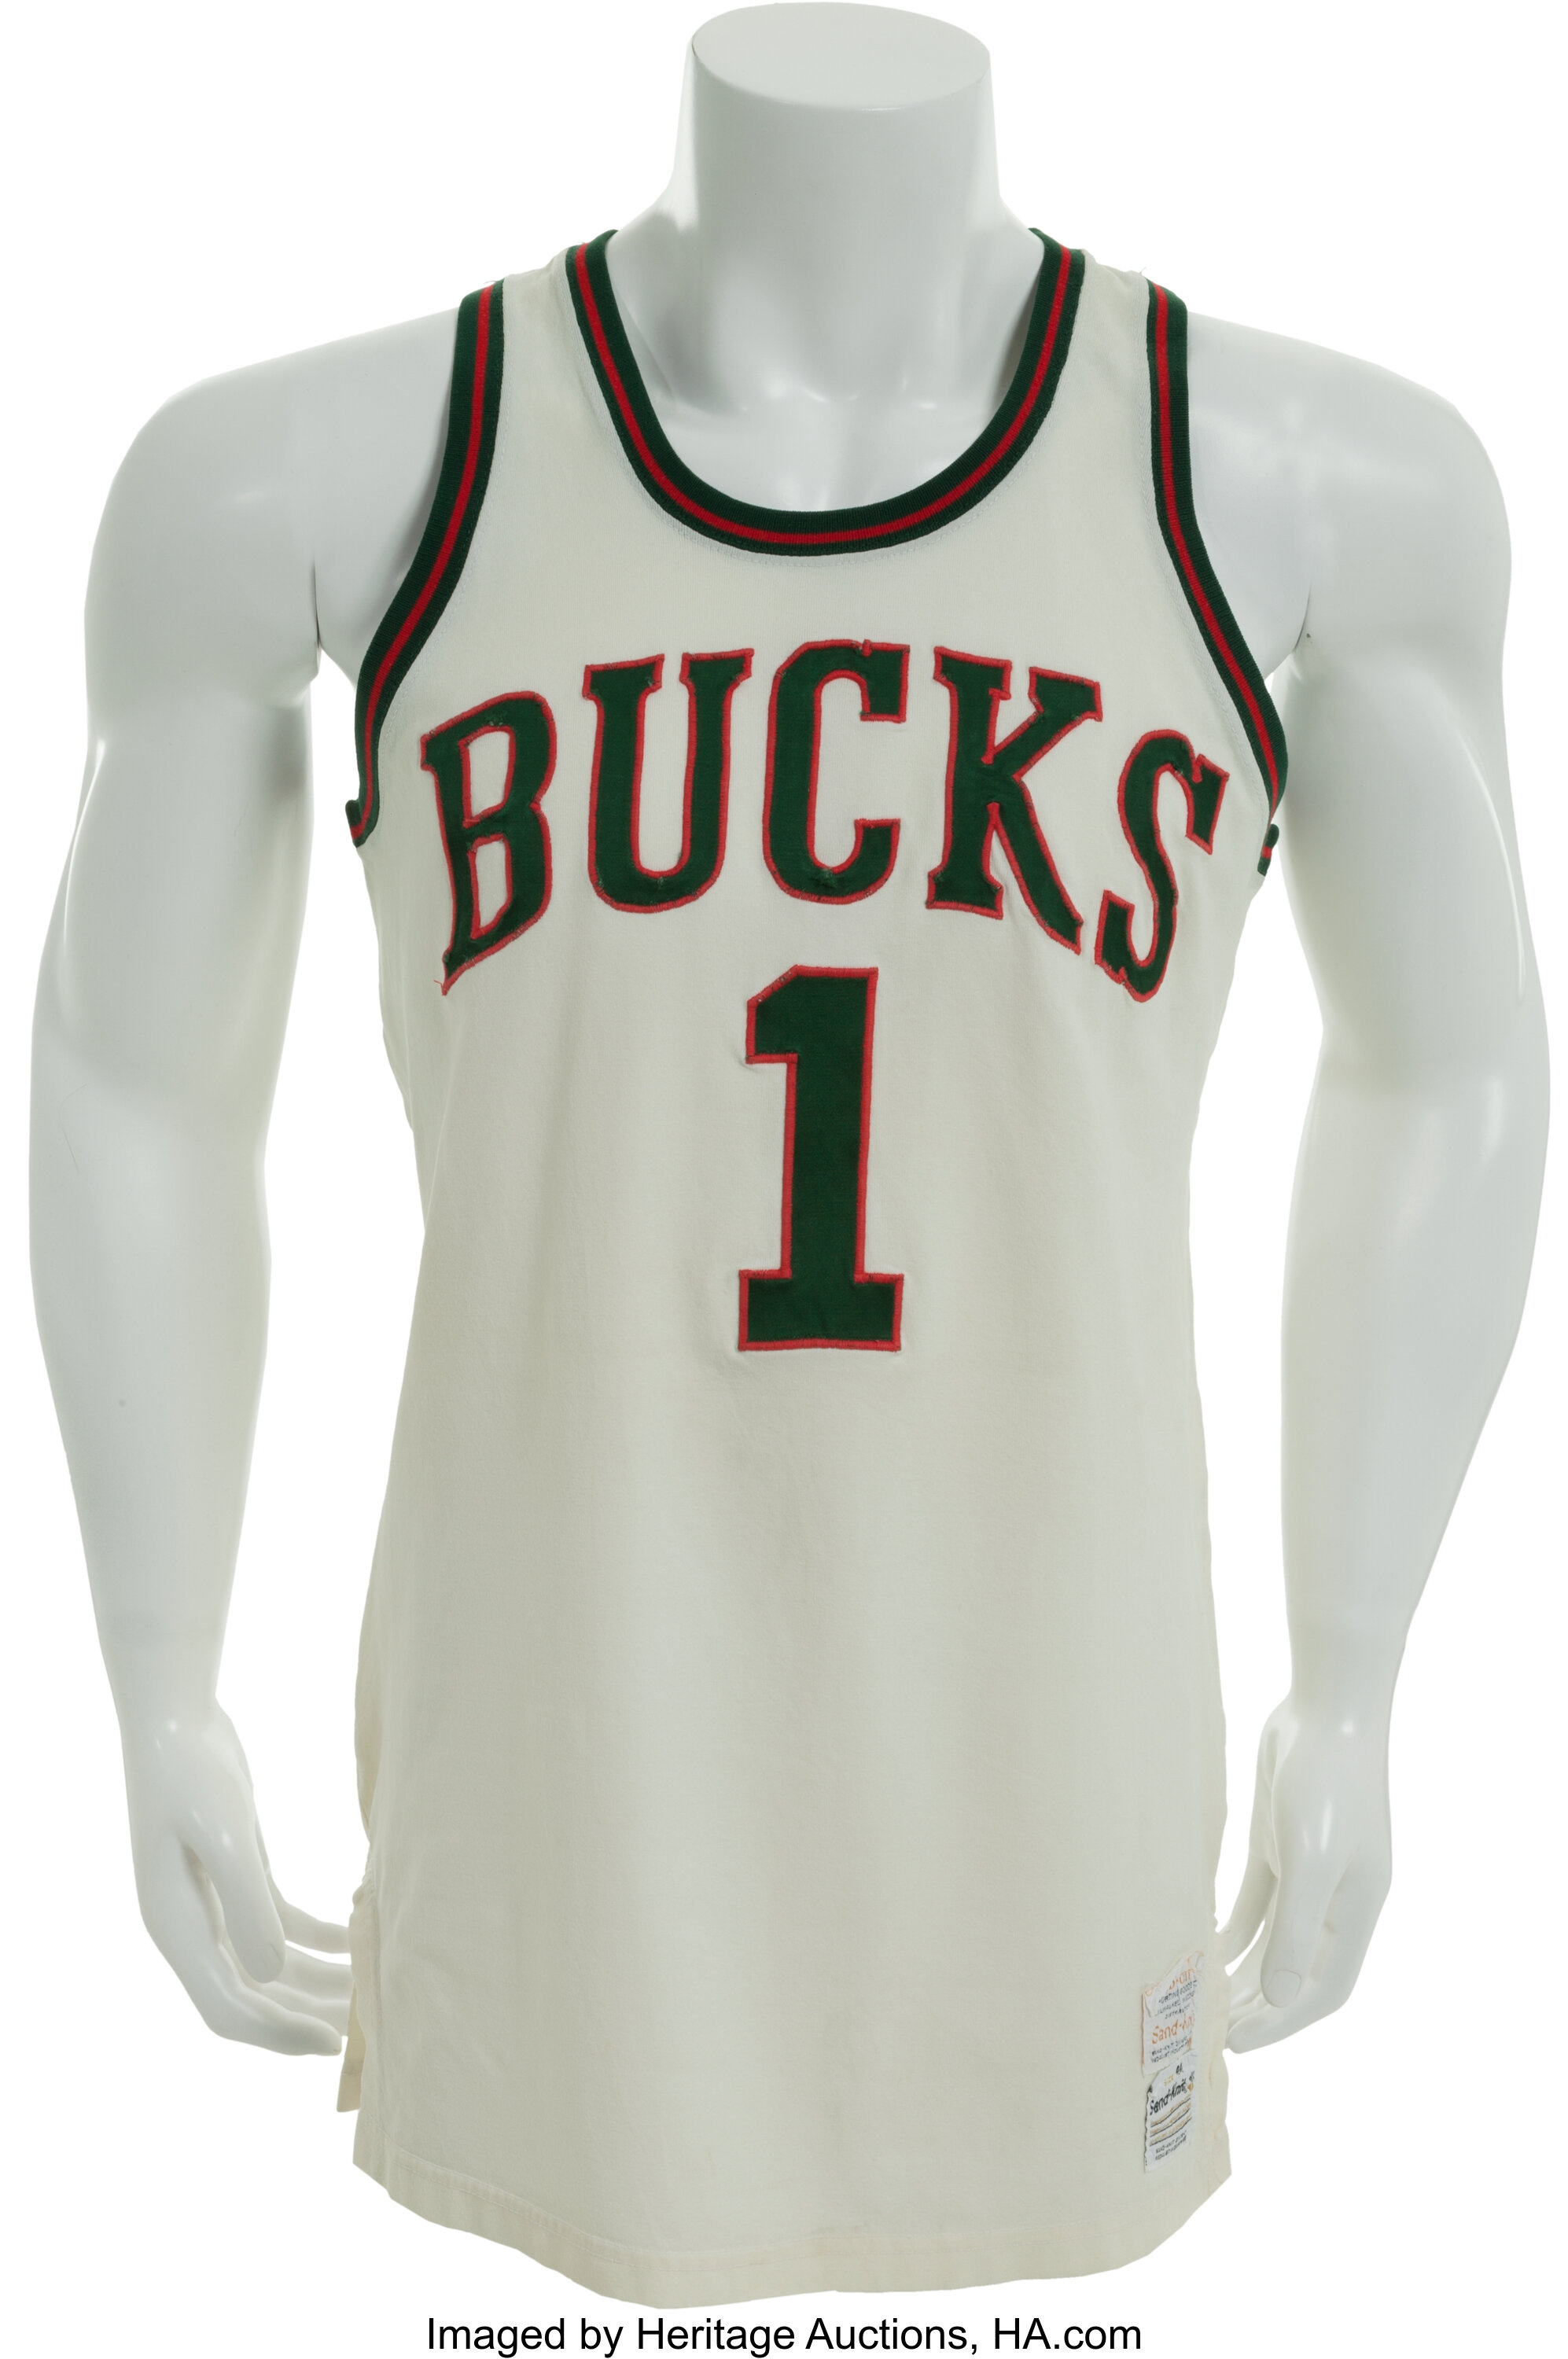 The Reason Why The Milwaukee Bucks Are Banned From Wearing Their